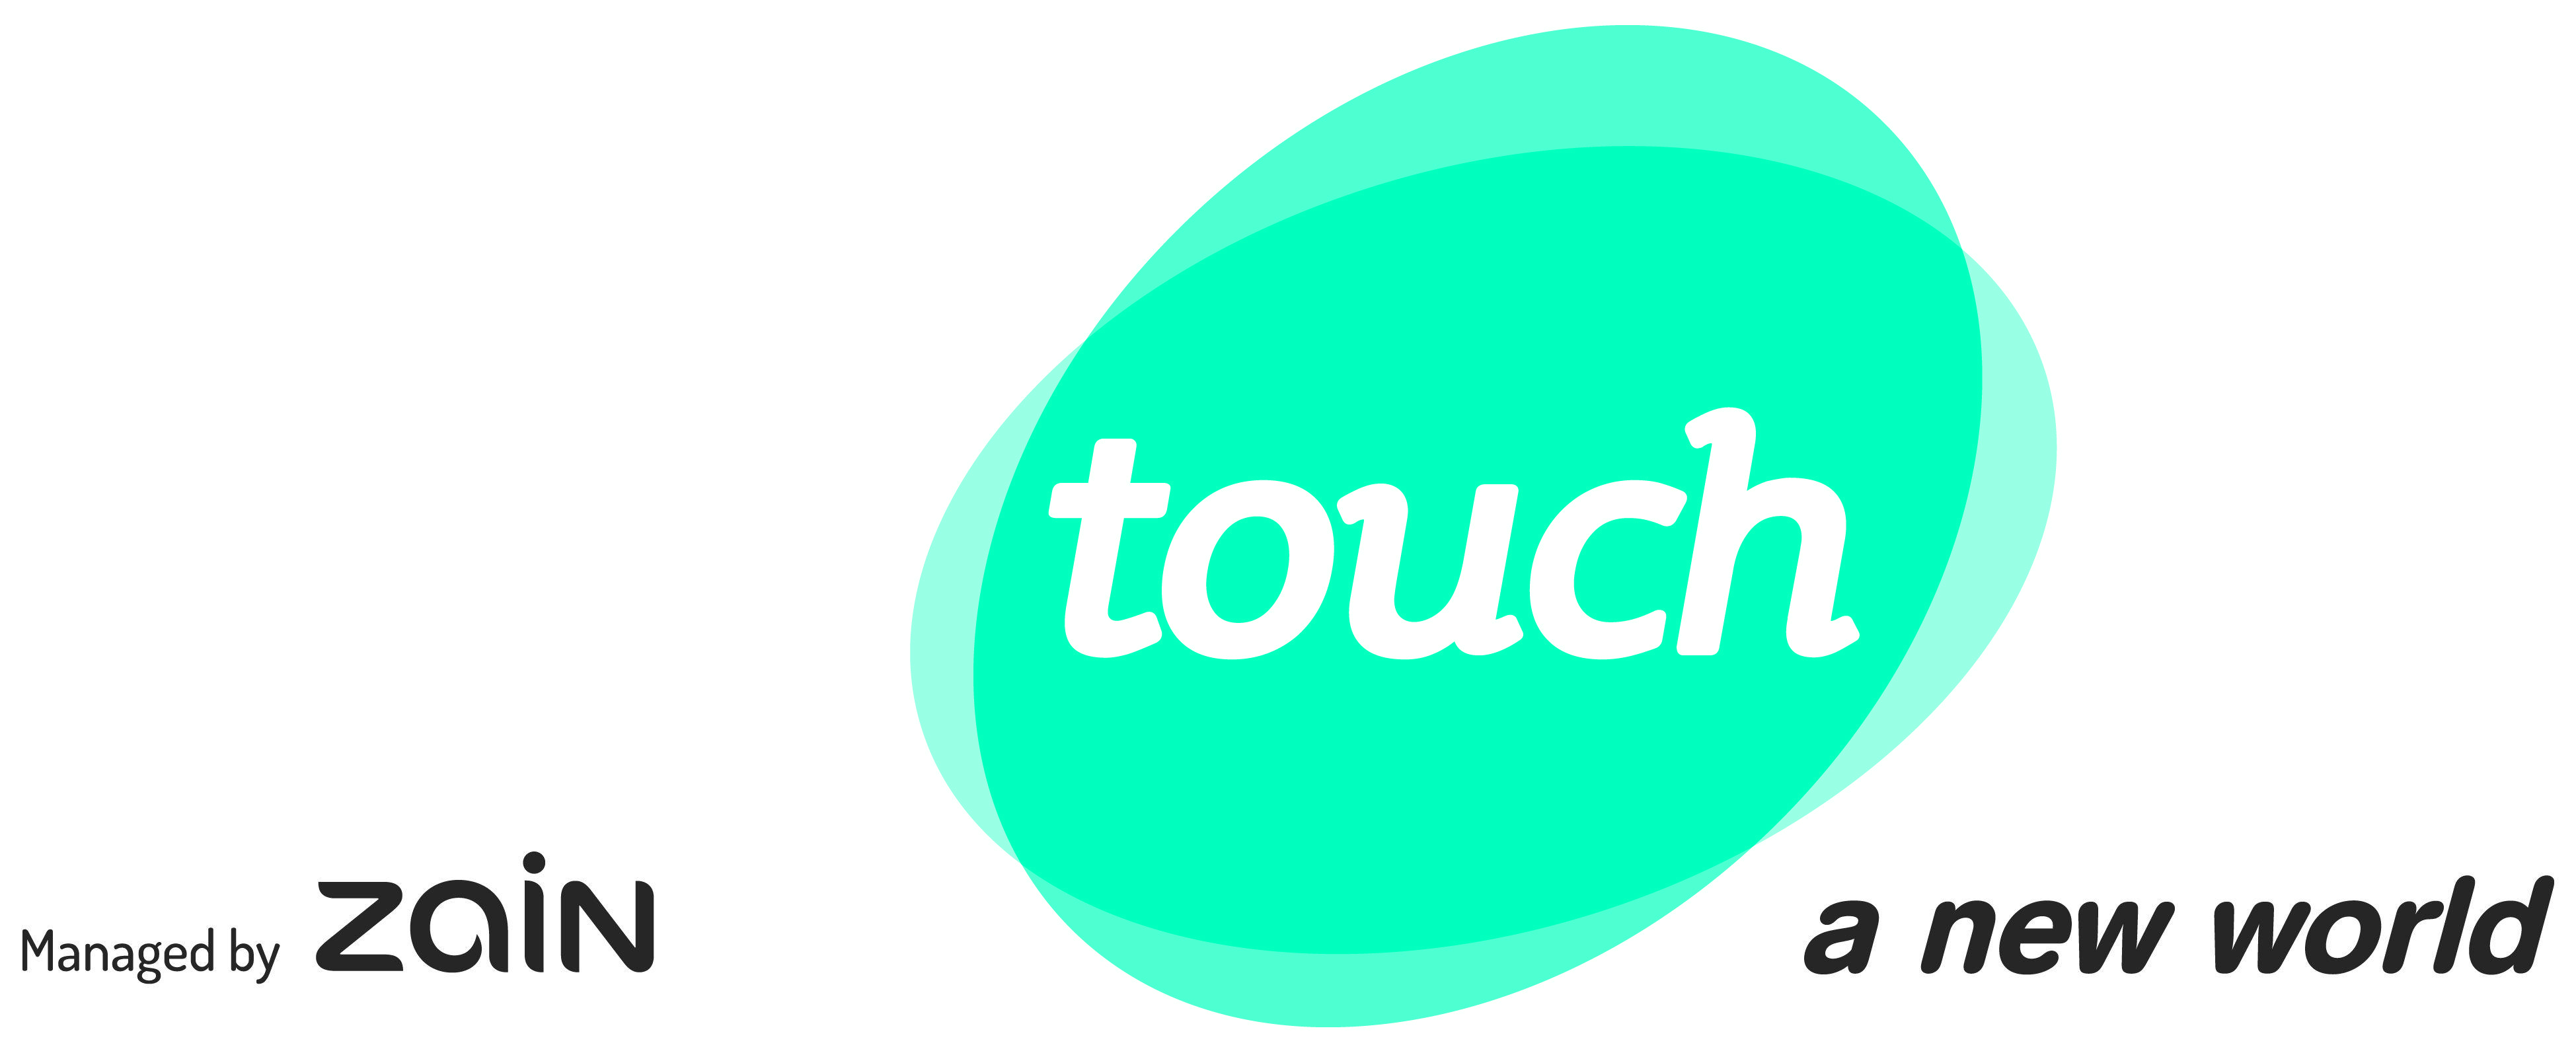 Touch Logo - touch supports localfestivals leveragingtourism and the economy